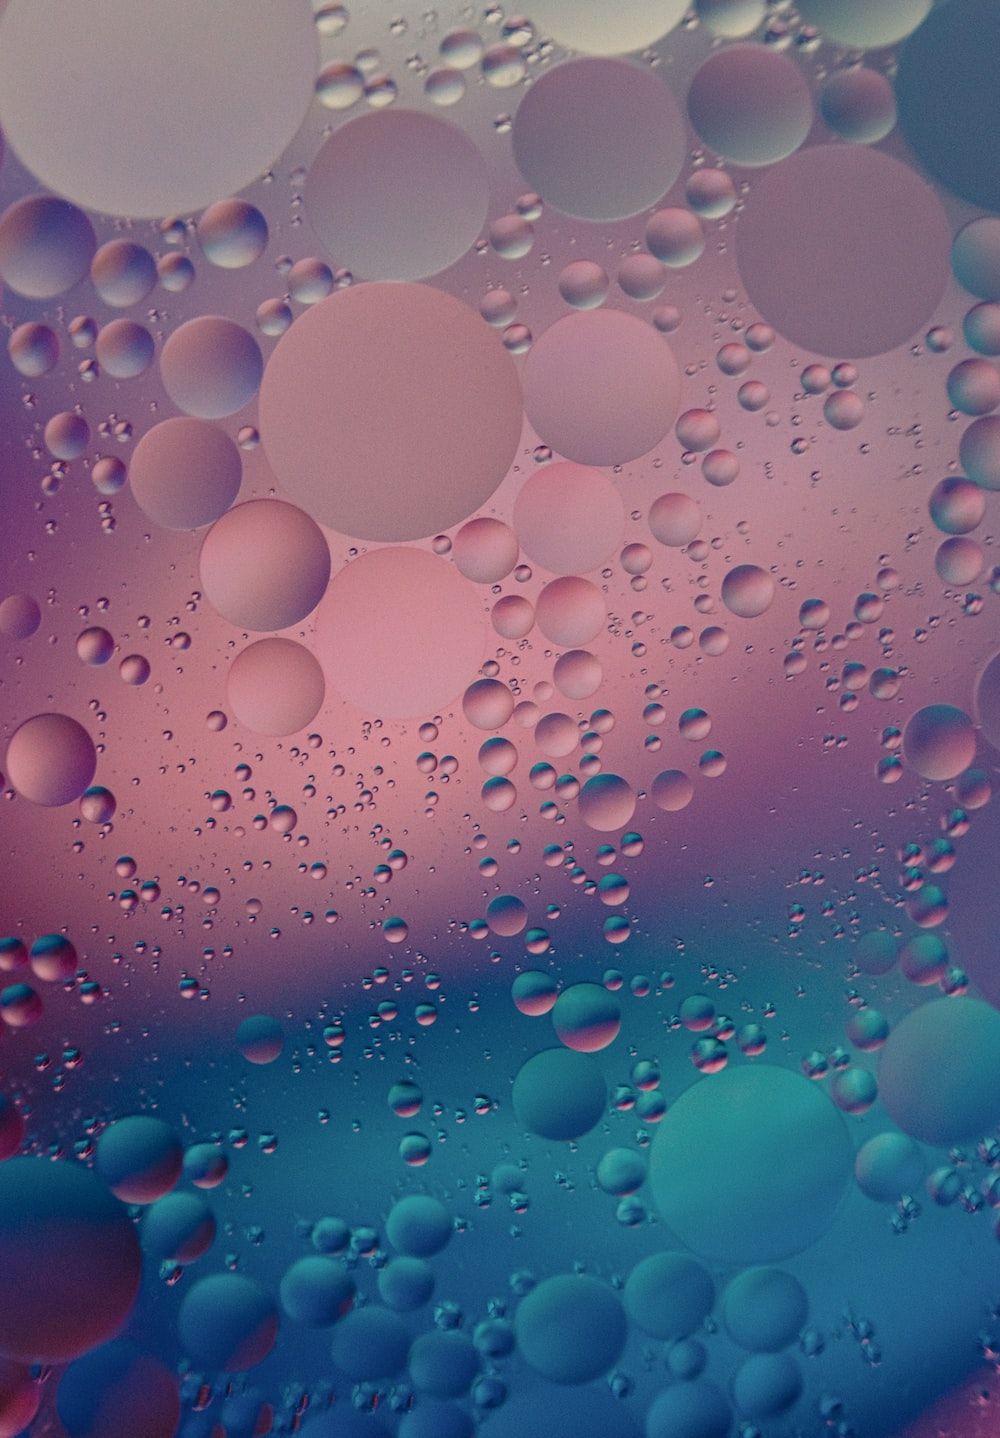 A close up of bubbles on a purple and blue background - Bubbles